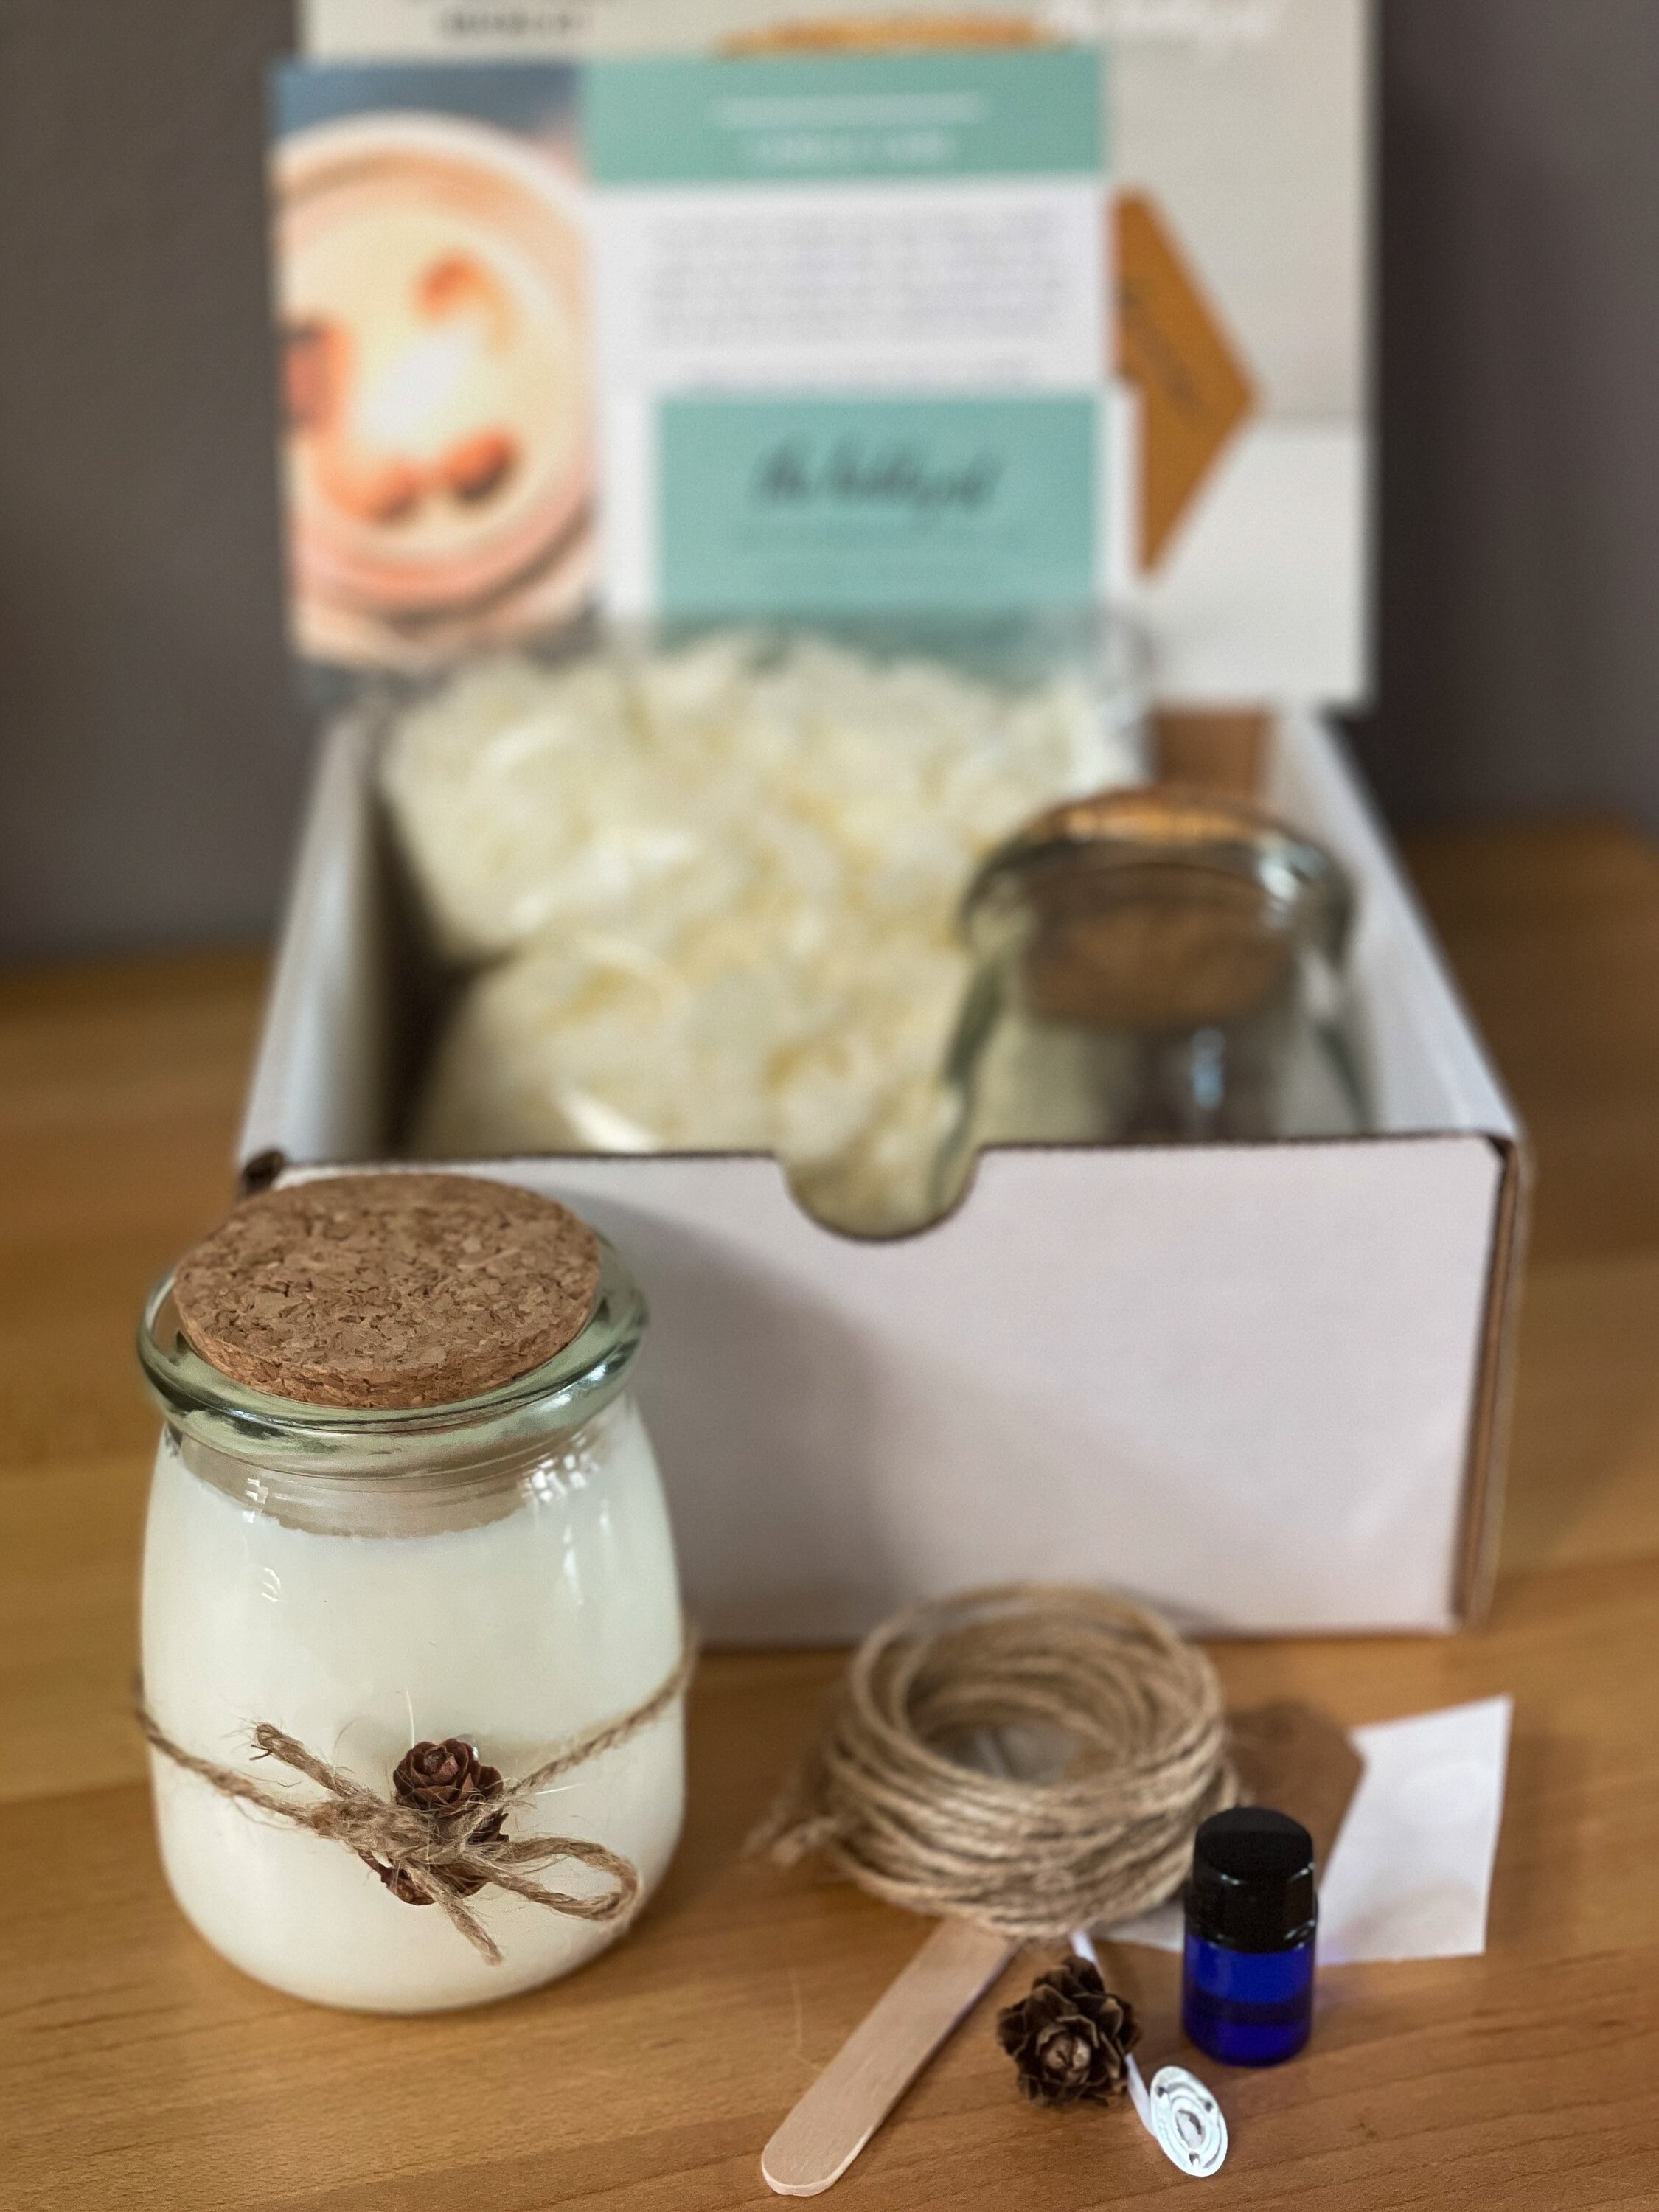 DIY Candle Making Kit, Easy Candle Making, Candle DIY Kit, Craft Kits for  Adults, Girls Night, Virtual Event Company Gift 